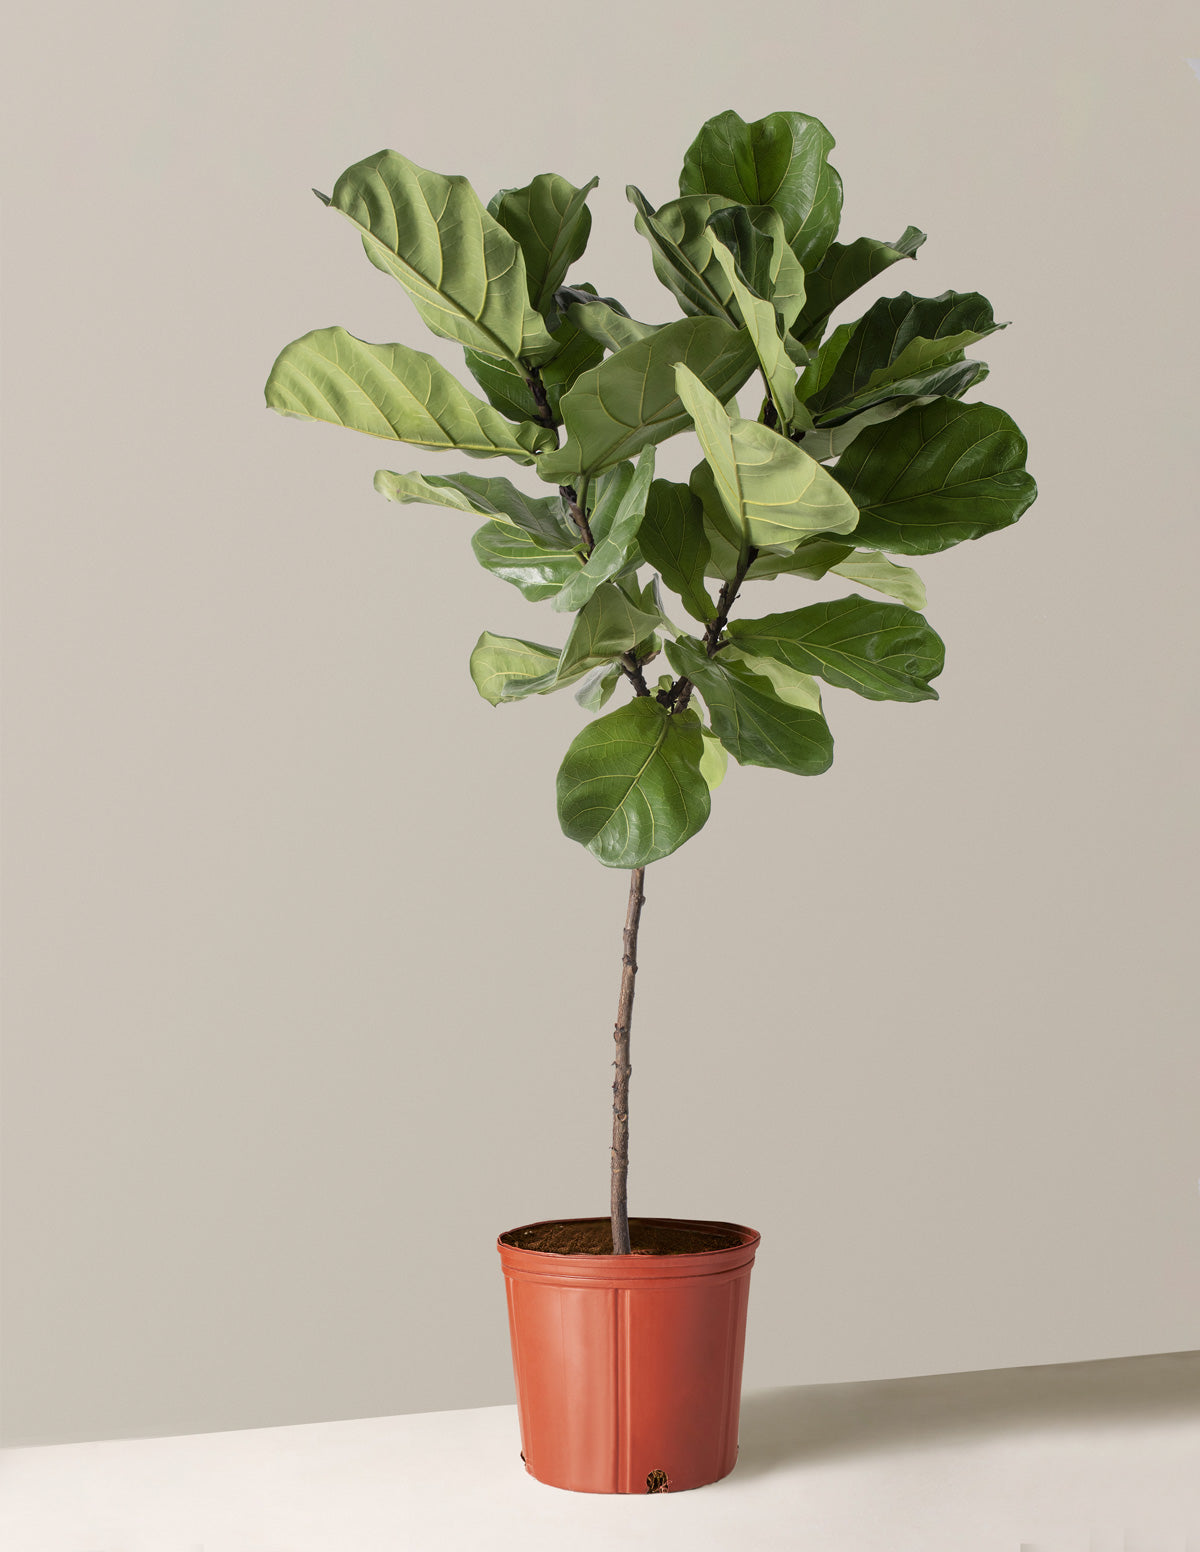 https://cdn.shopify.com/s/files/1/0150/6262/products/the-sill_fiddle-leaf-fig_large_growpot_variant.jpg?v=1700175347